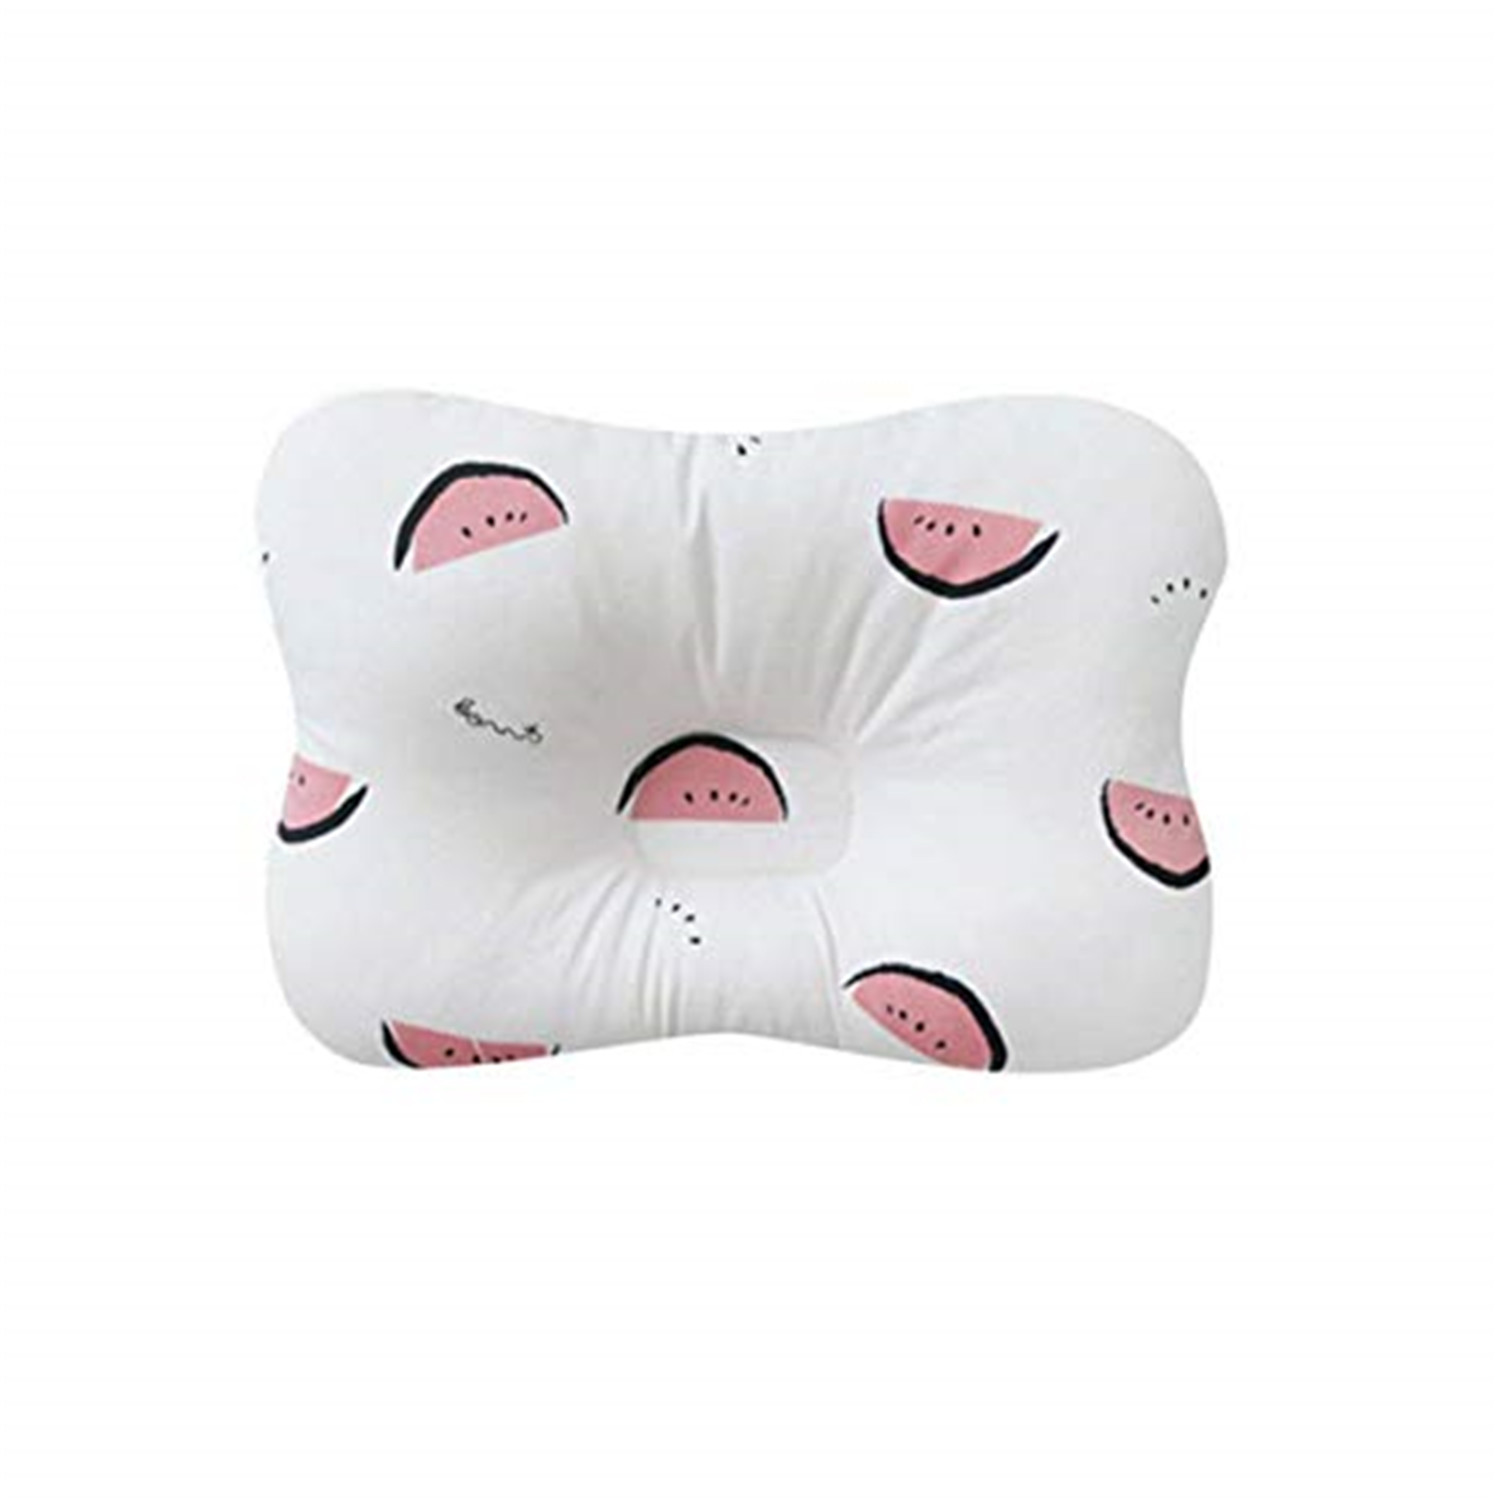 Head Shaping Pillow for Infants Soft Head Support Pillow for 0-1 Year Old，Pink vocheer Anti Flat Head Baby Pillow 